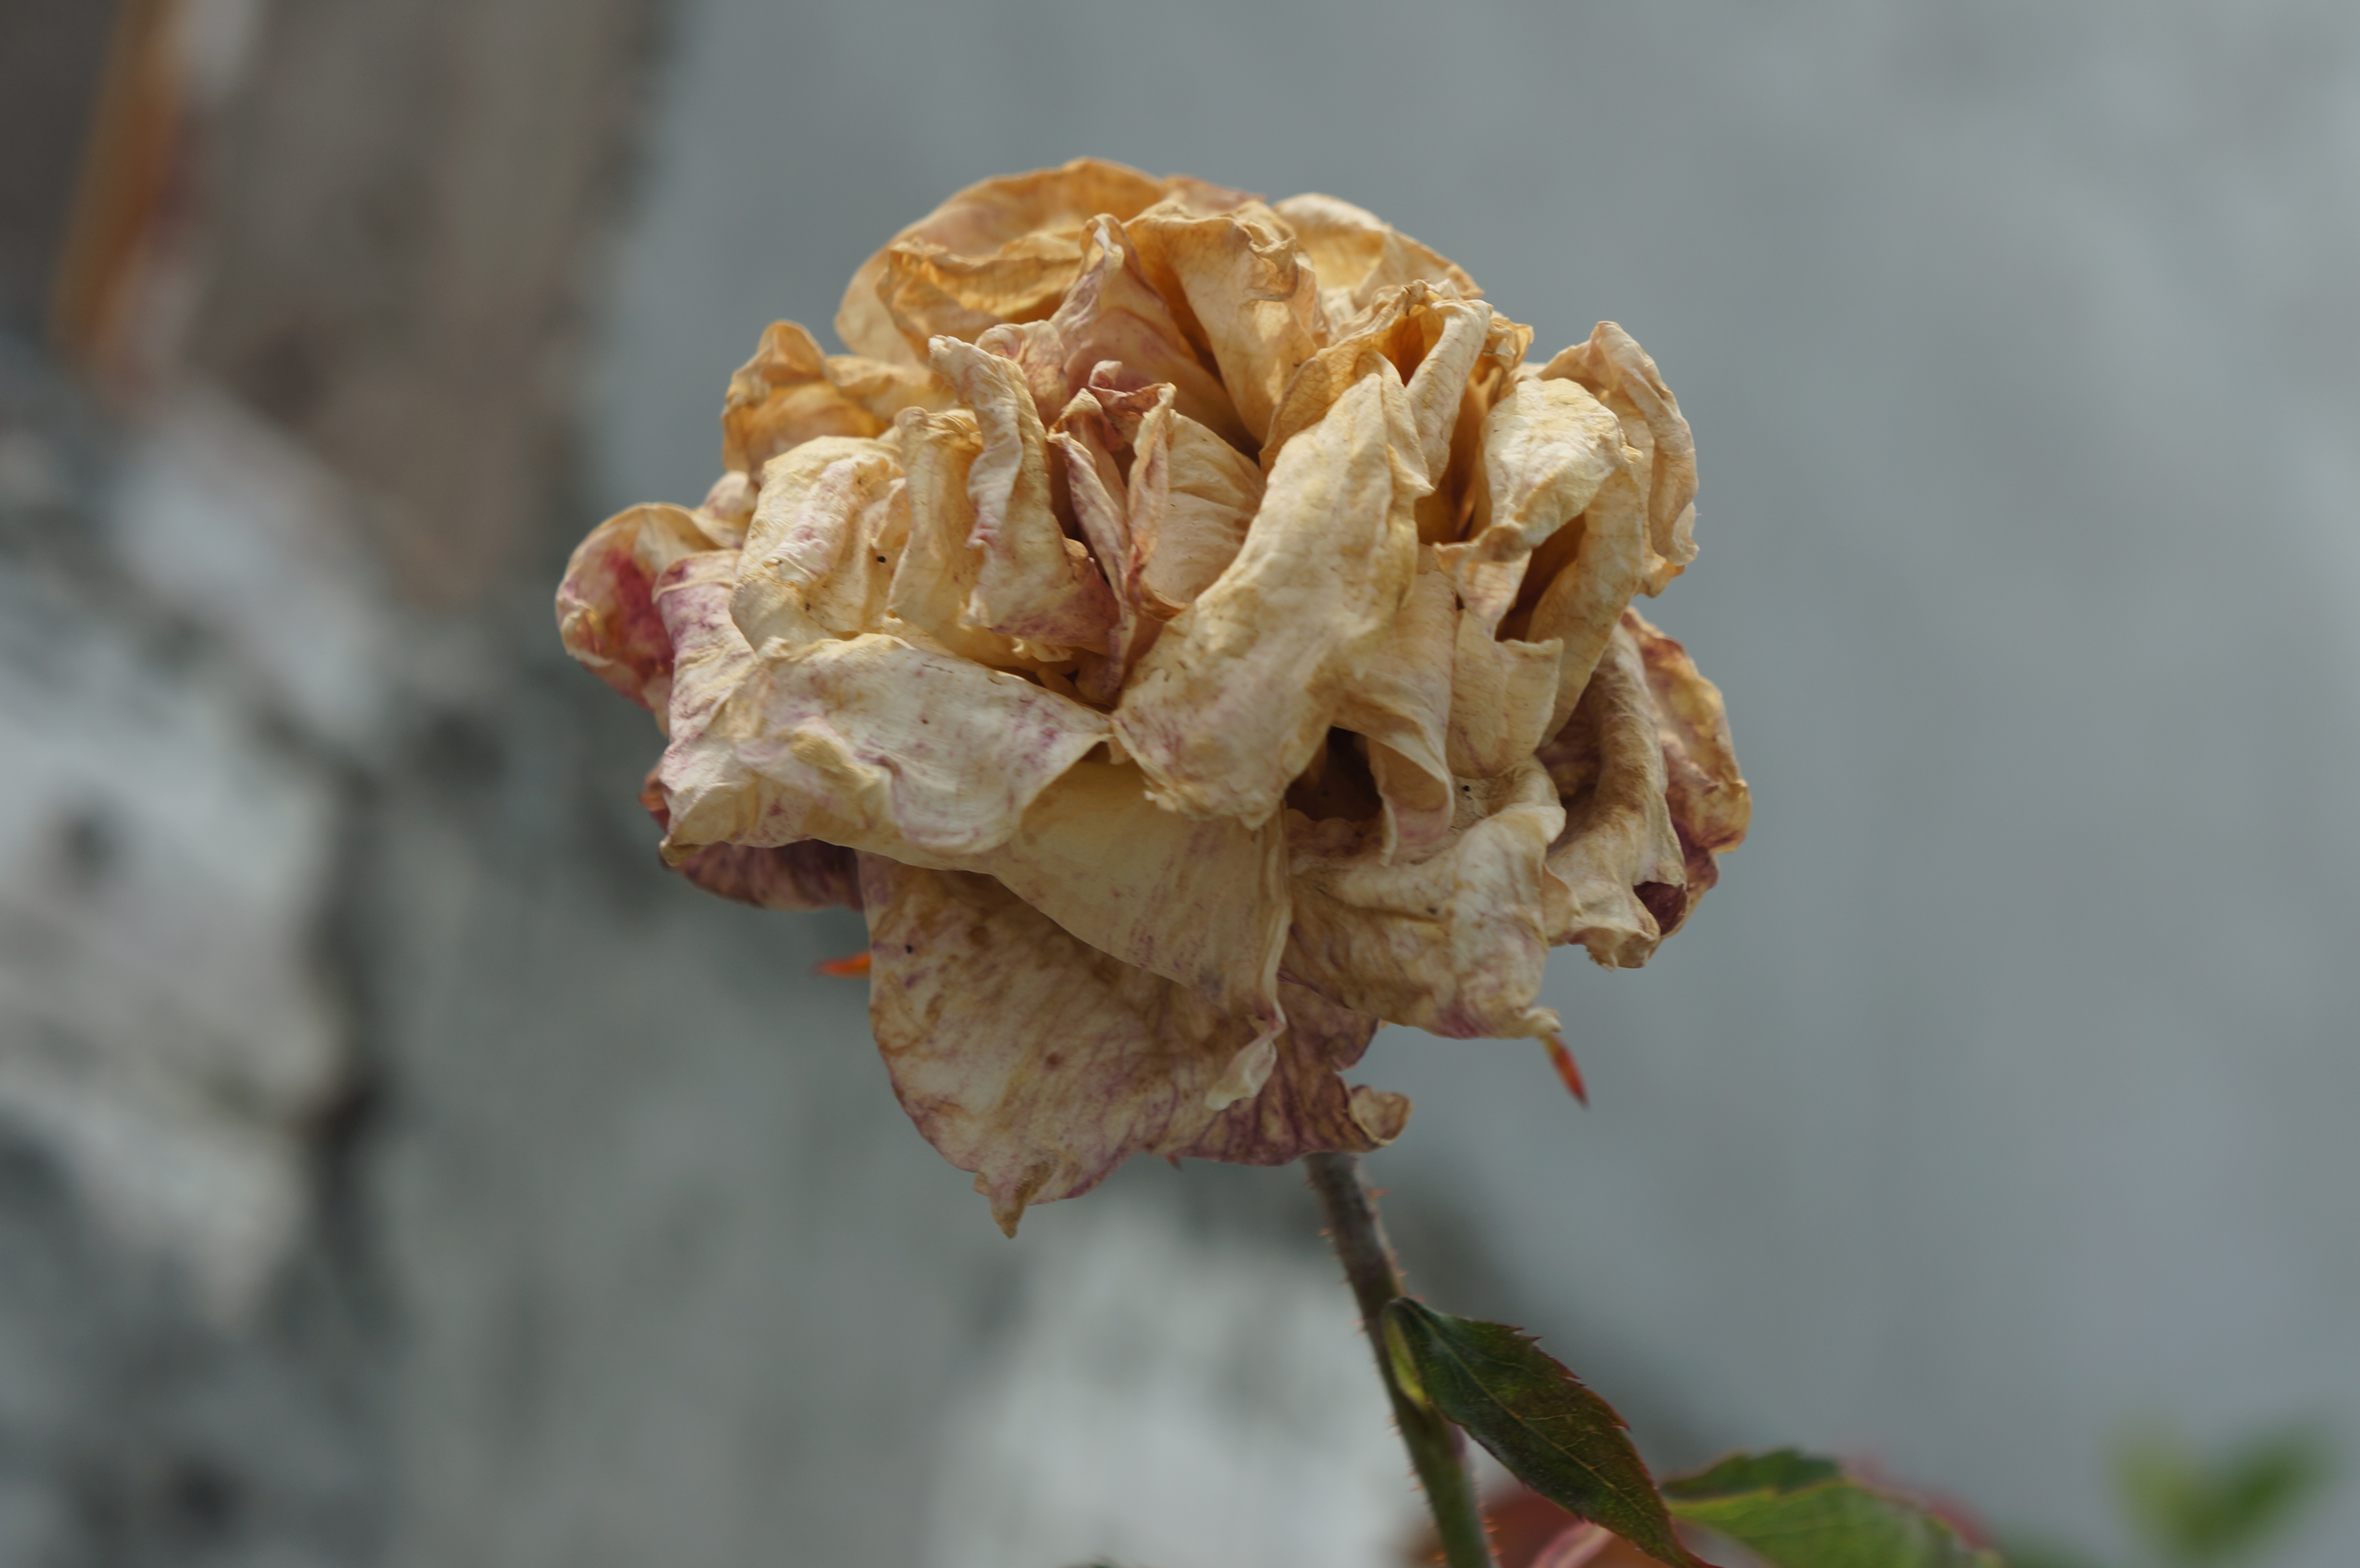 The Dying Flower « Films, photography, art, etc.